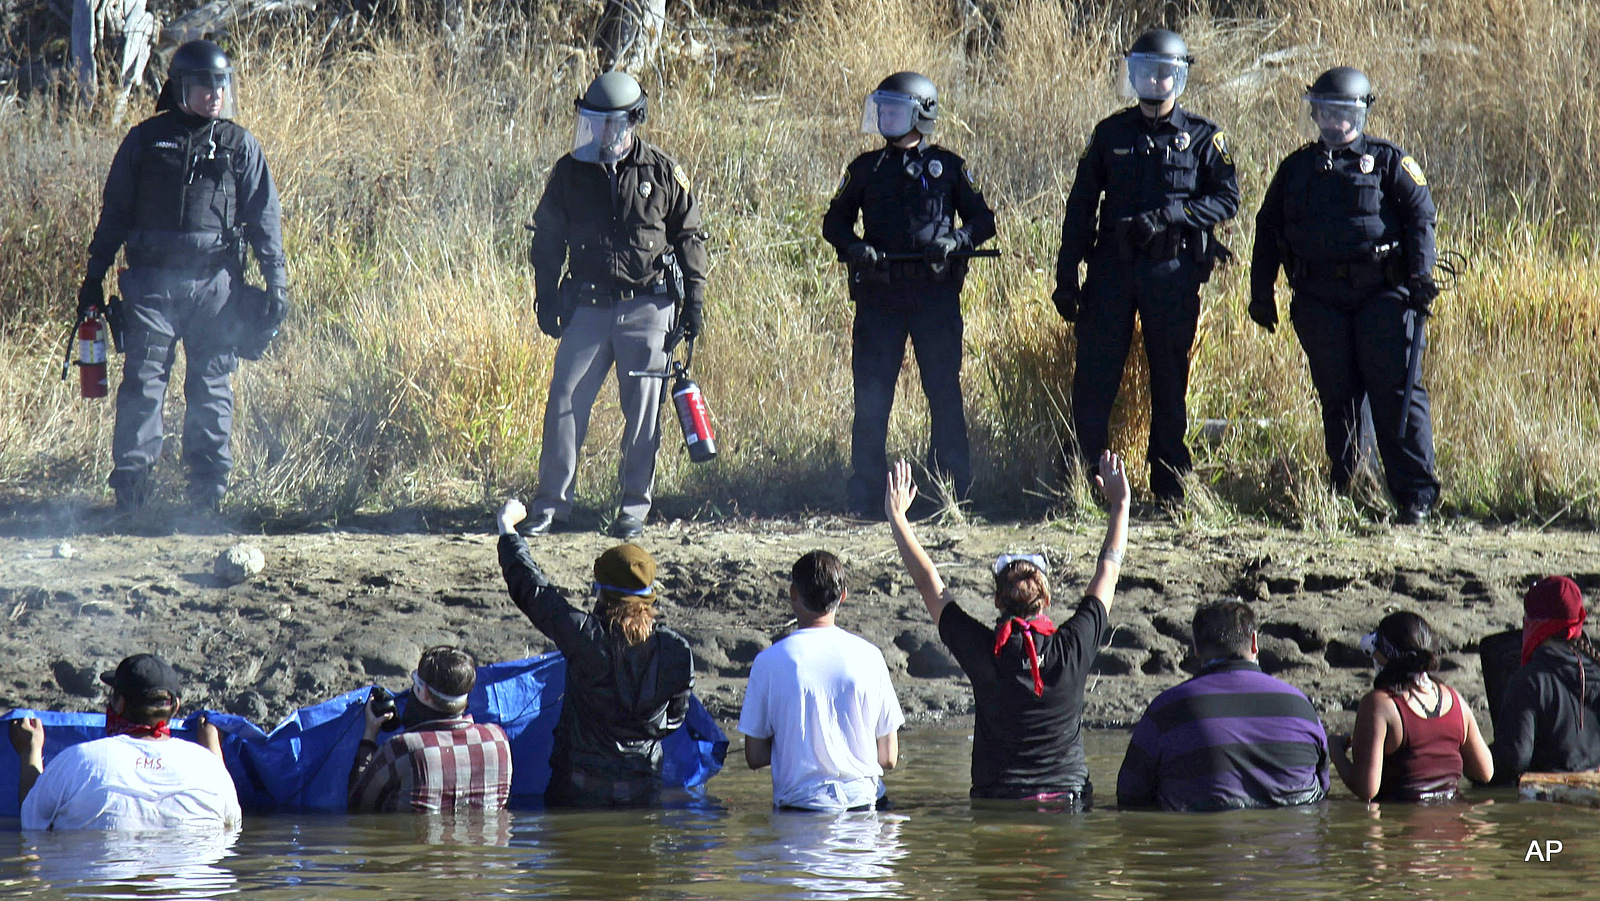 Dozens of protestors demonstrating against the expansion of the Dakota Access Pipeline wade in cold creek waters confronting local police, as remnants of pepper spray waft over the crowd near Cannon Ball, N.D., Wednesday, Nov. 2, 2016. 